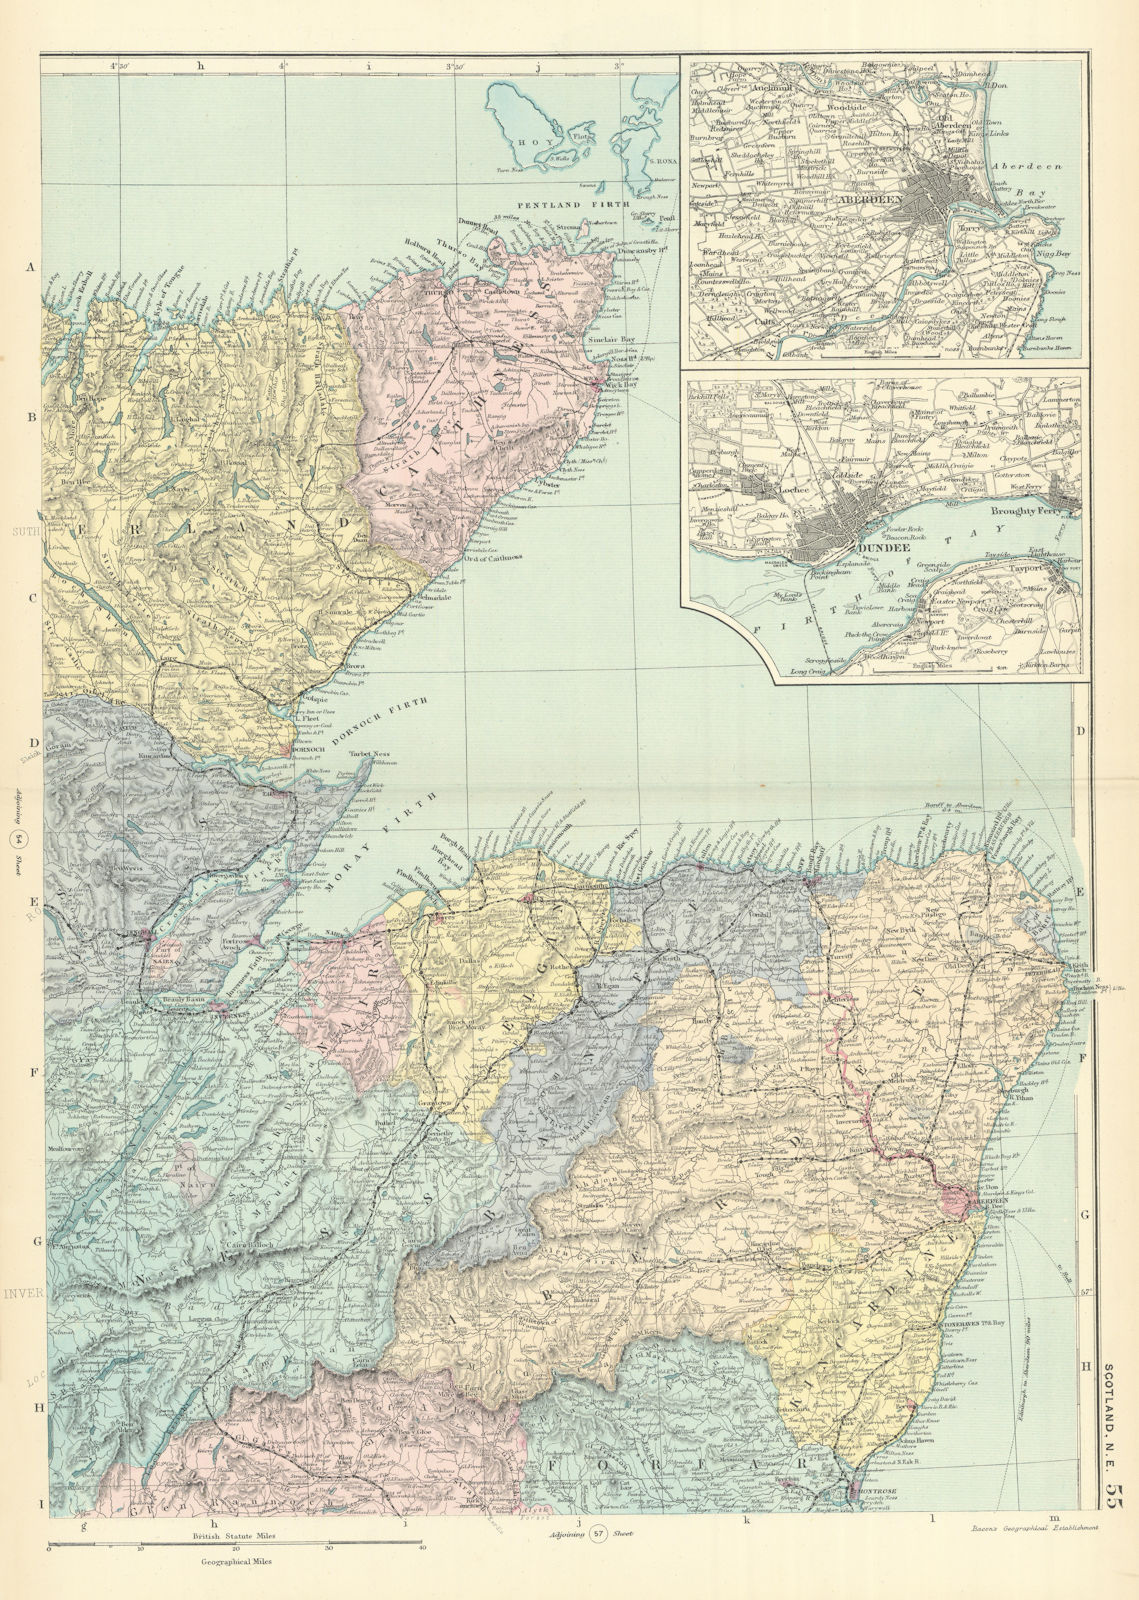 SCOTLAND (North East) Highlands Aberdeen Inverness Banff GW BACON 1891 old map